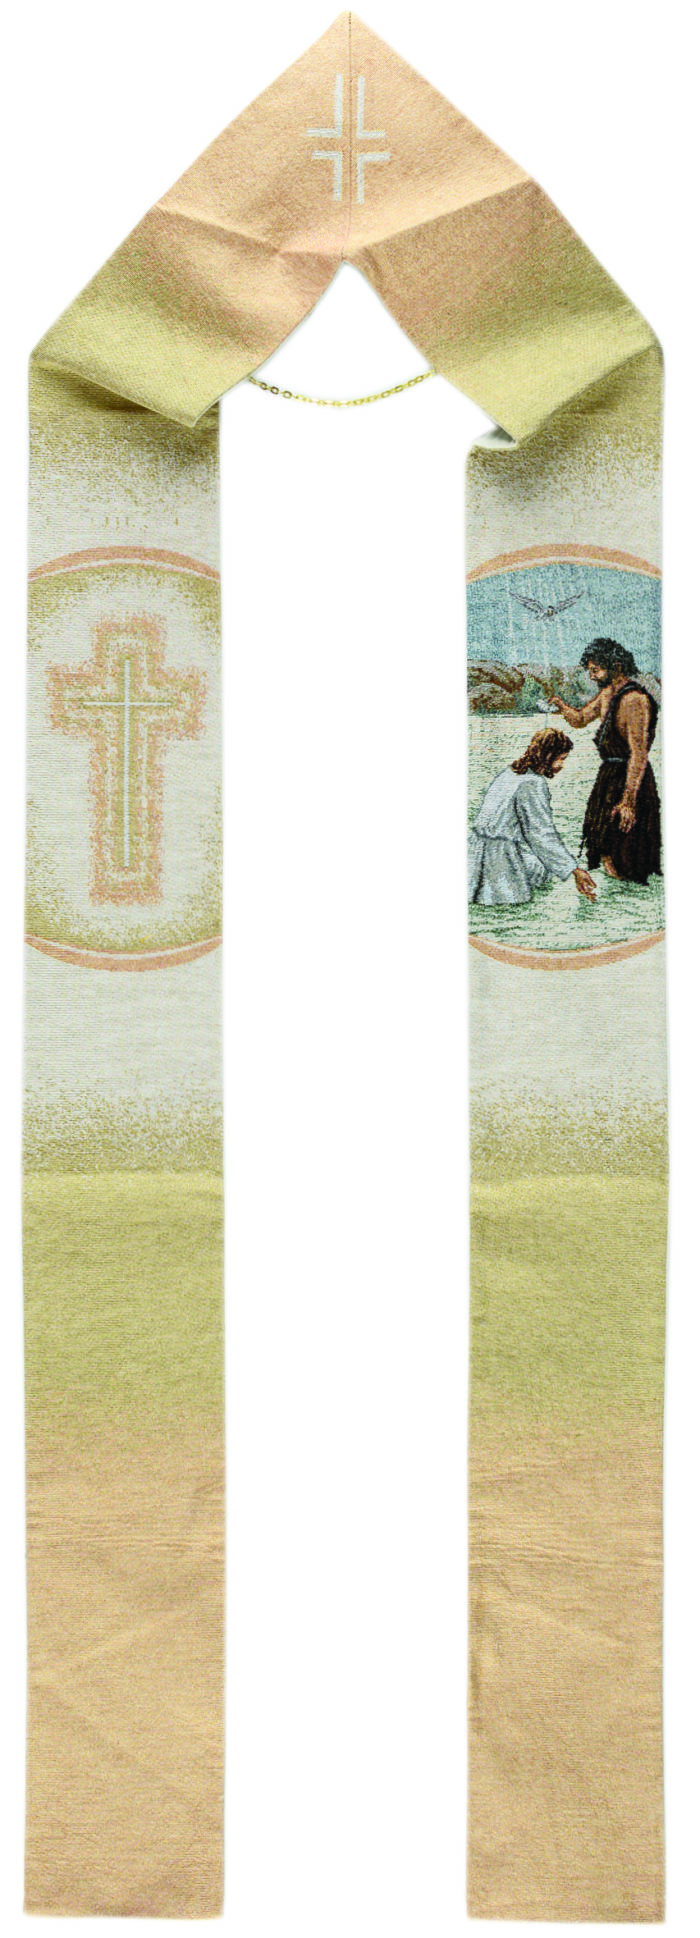 Stola "Baptism of Jesus" entirely woven and embroidered on the frame with scene of the Baptism of Jesus